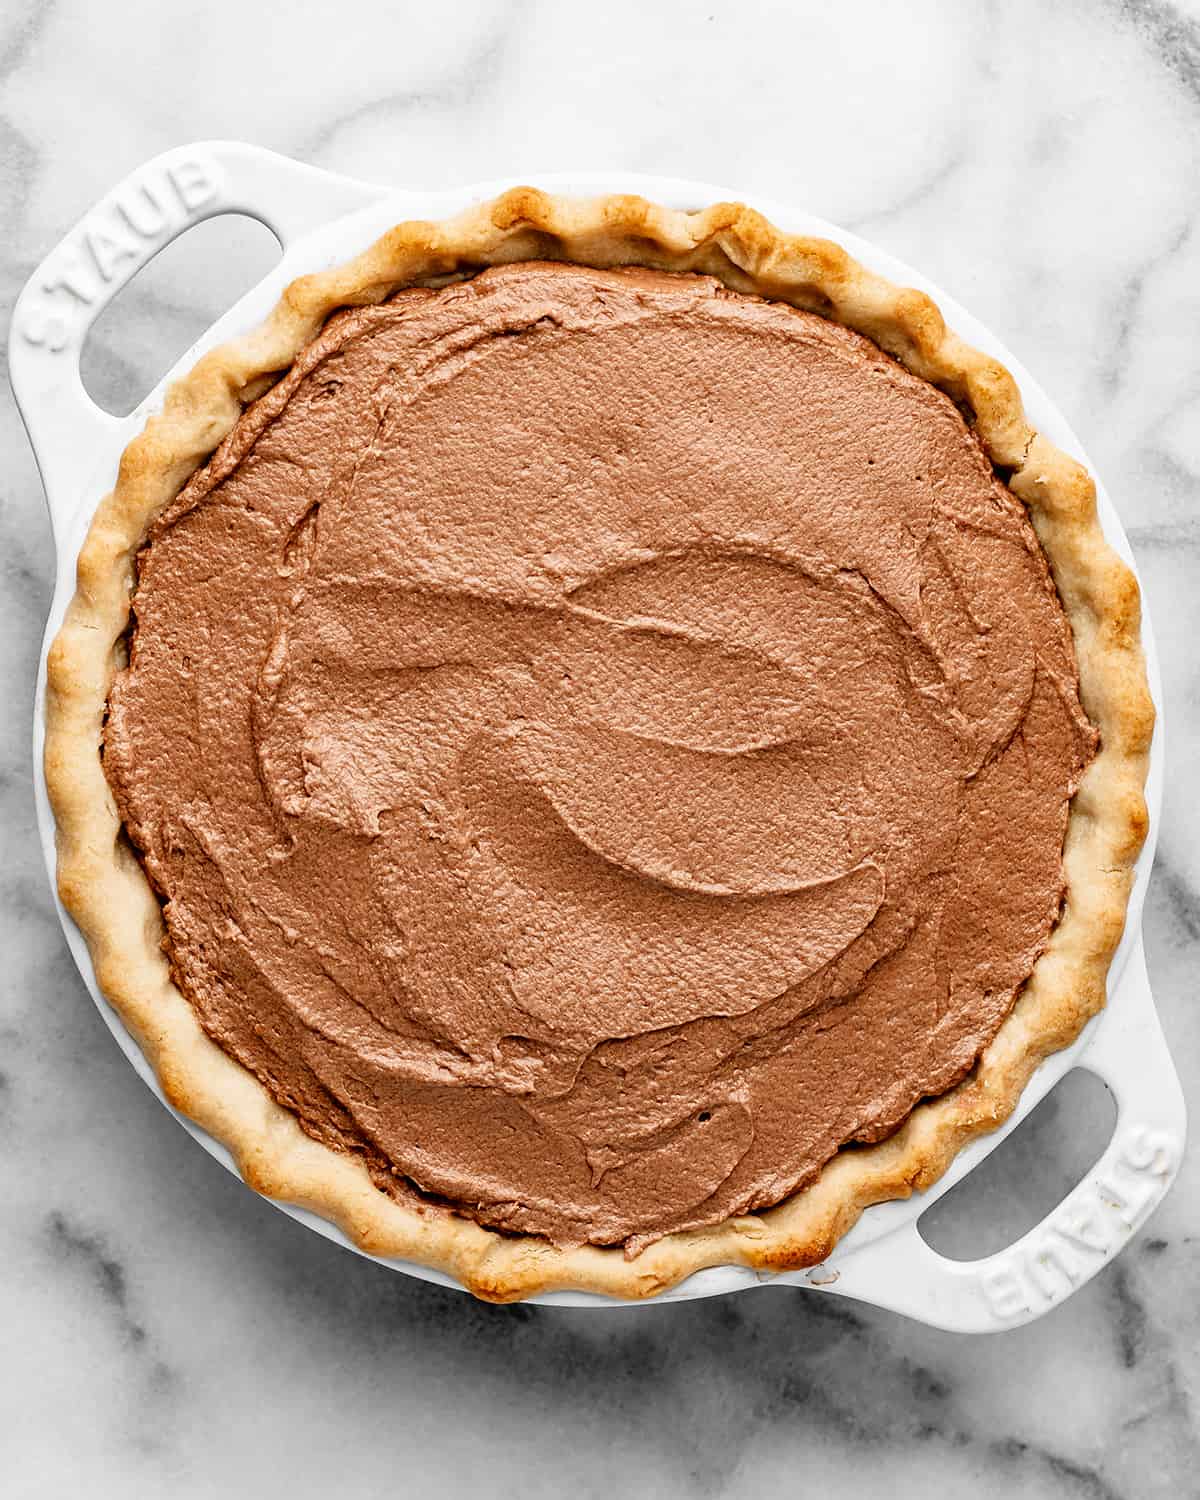 assembling french silk pie - spreading chocolate into pie crust